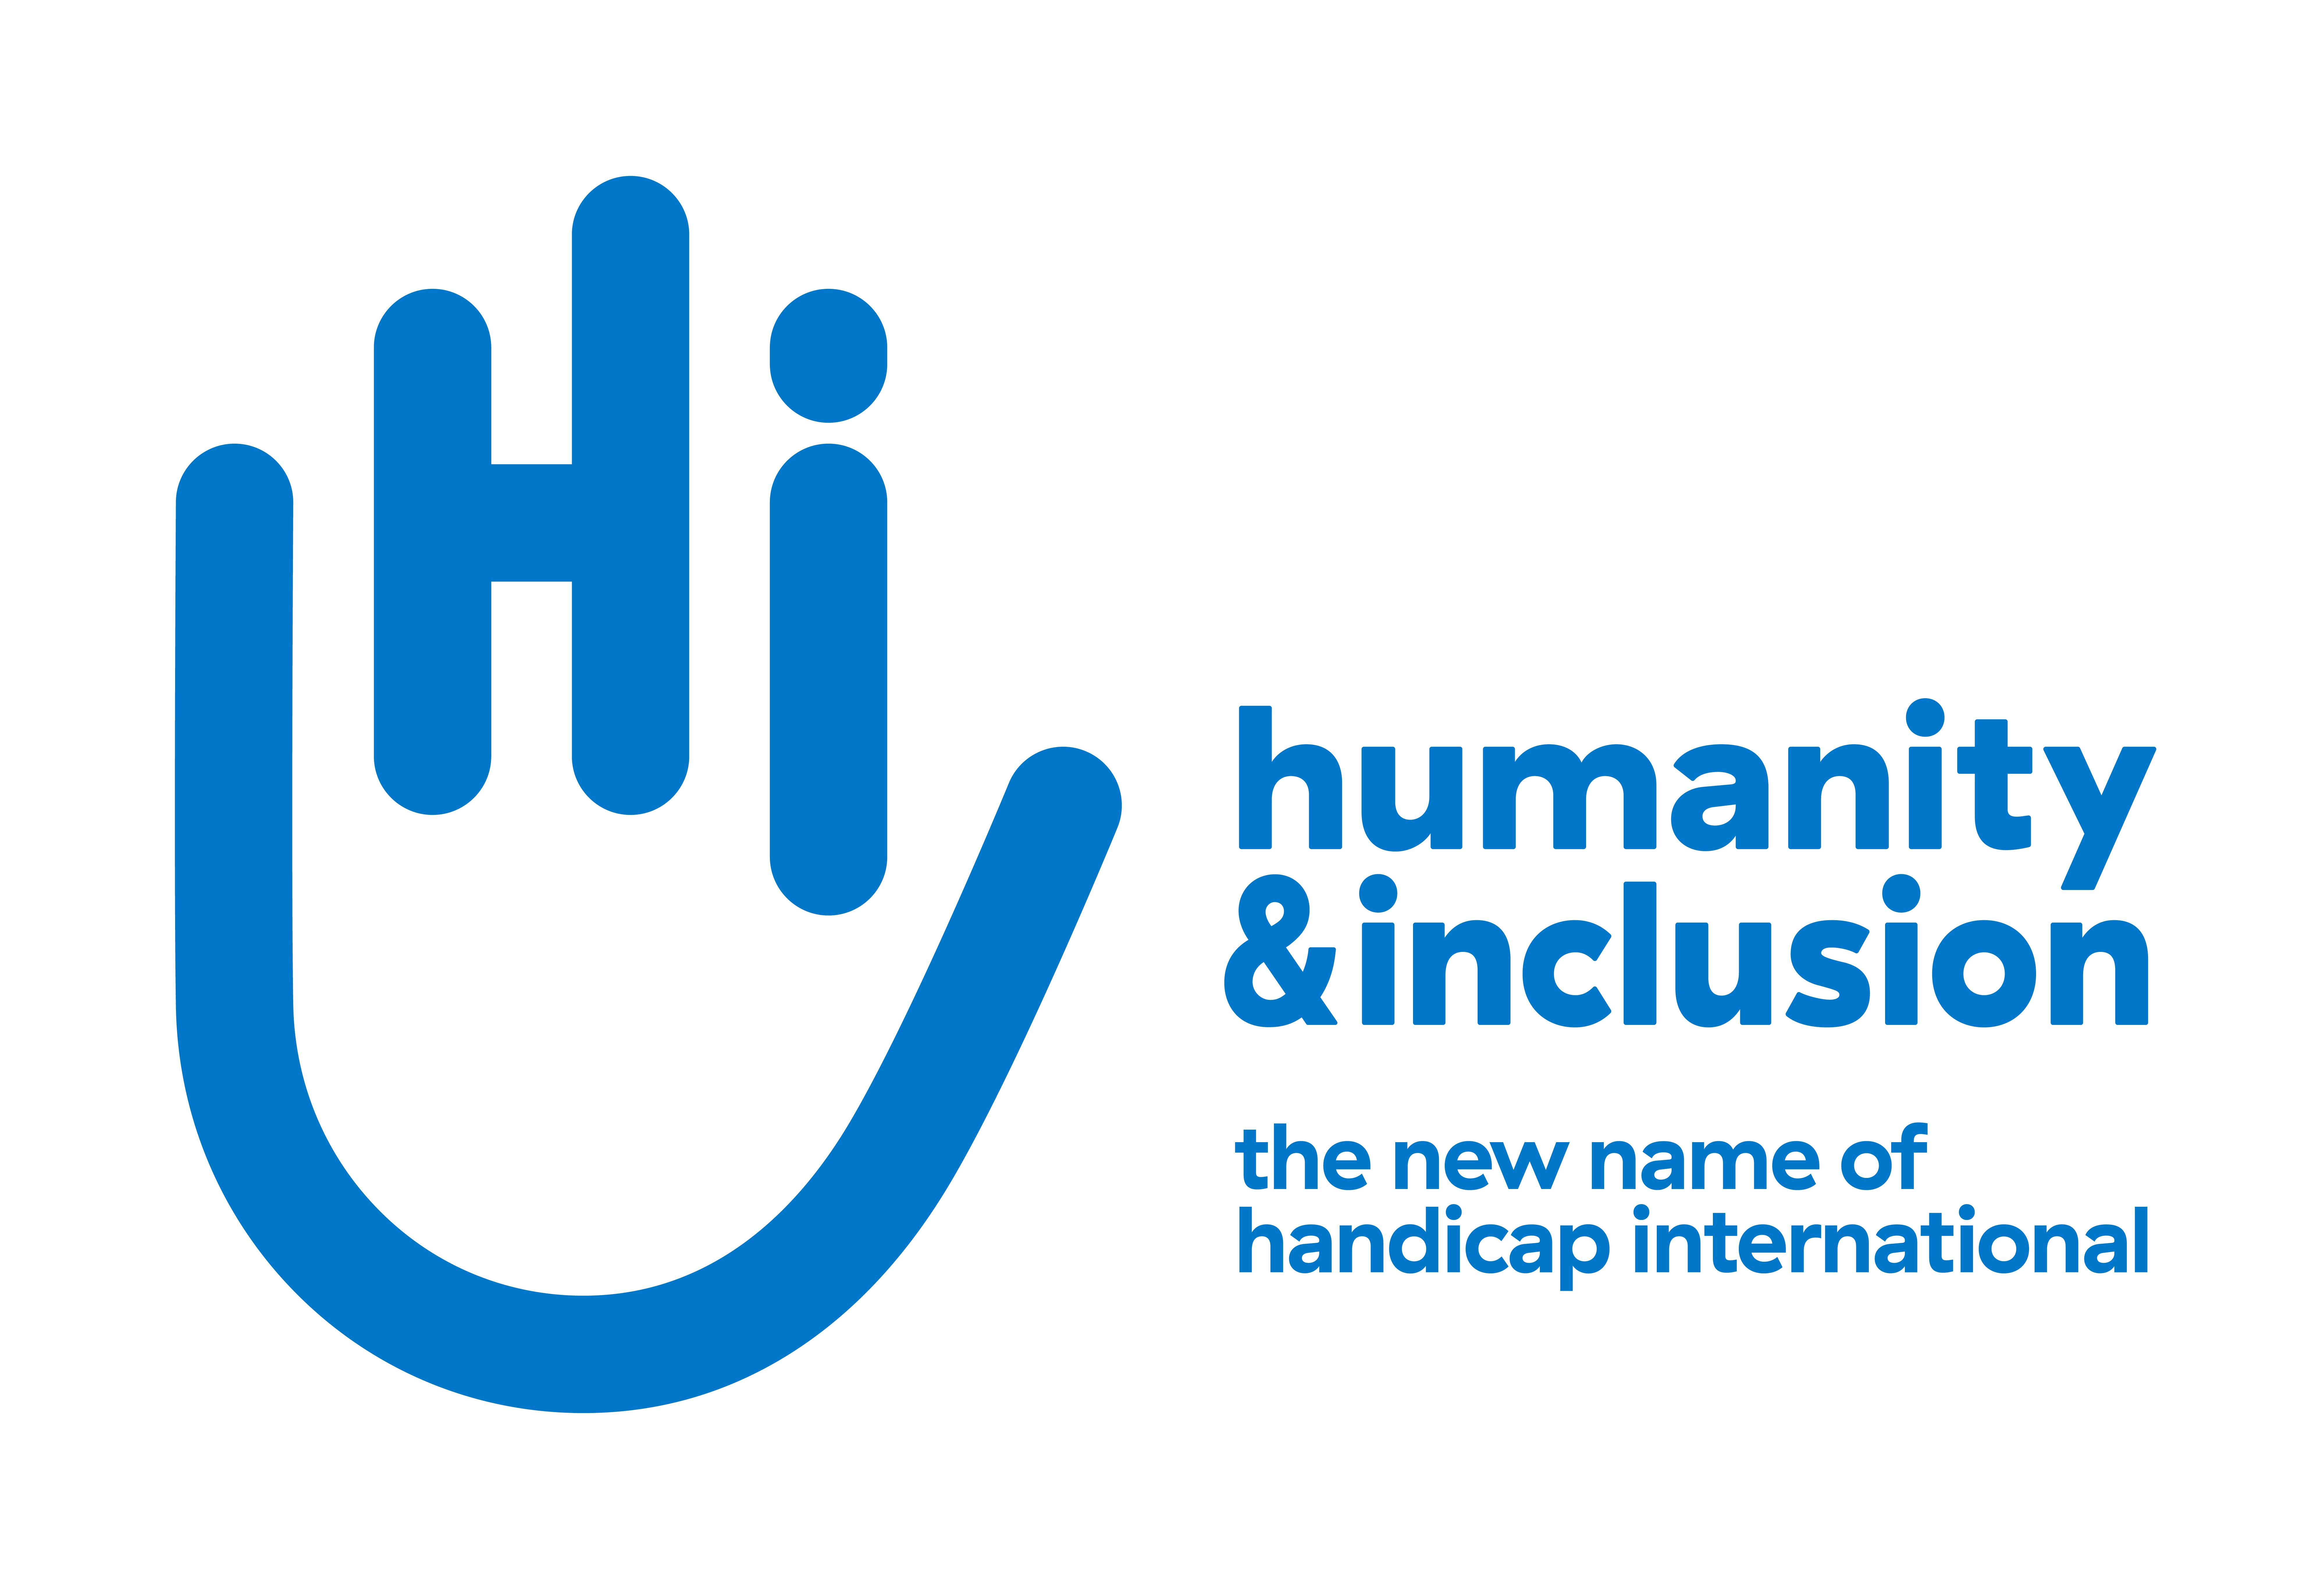 Humanity & Inclusion (formerly Handicap International)